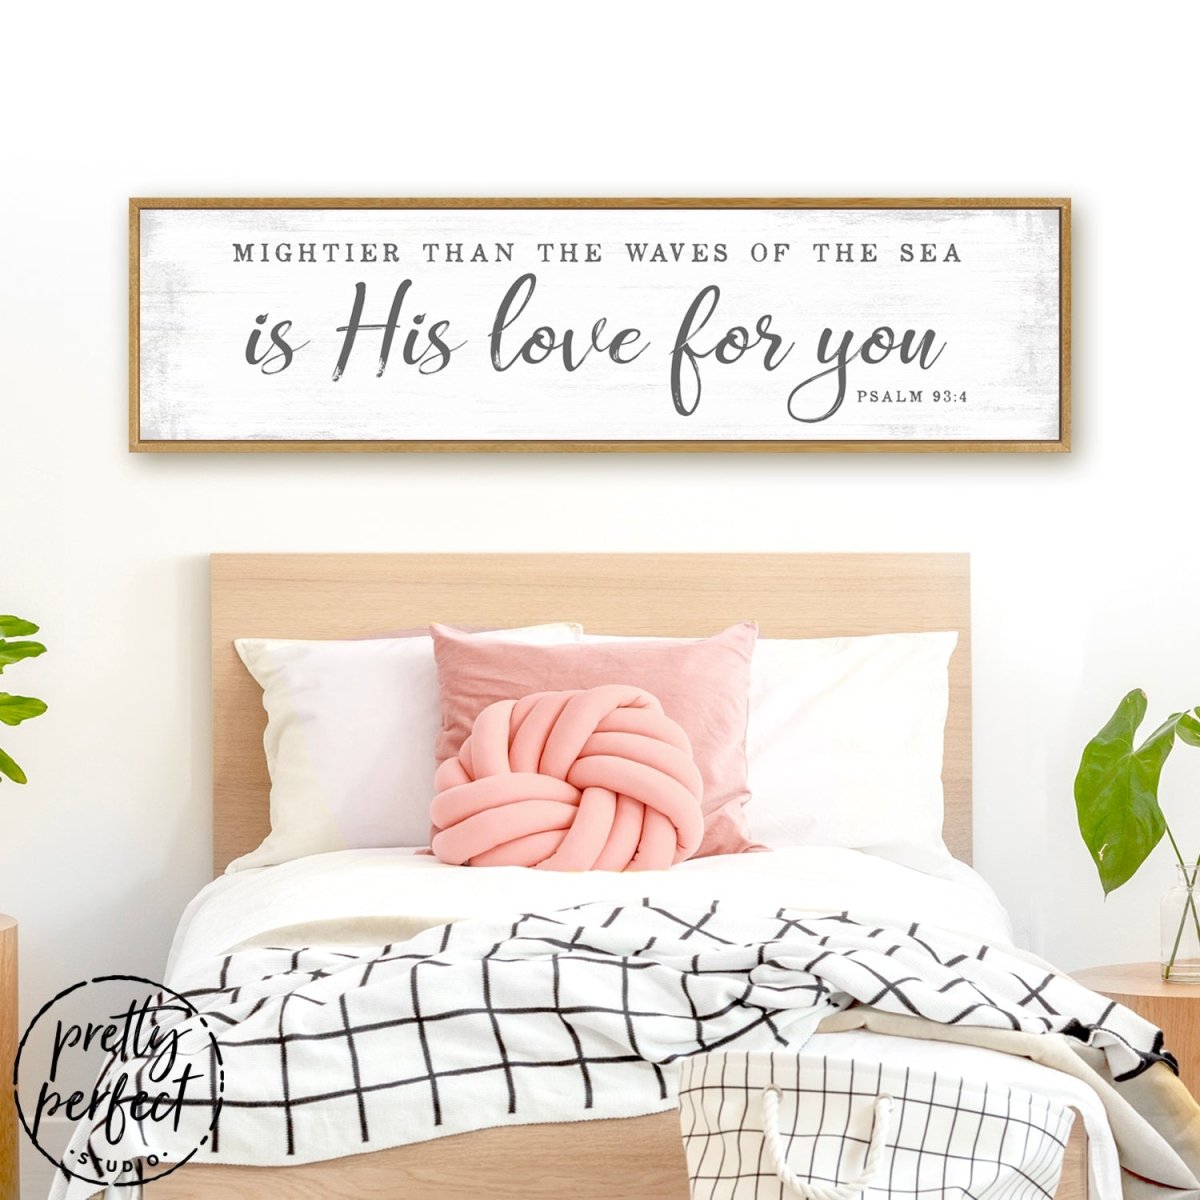 Mightier Than the Waves of the Sea Is His Love For You Sign in Family Room - Pretty Perfect Studio